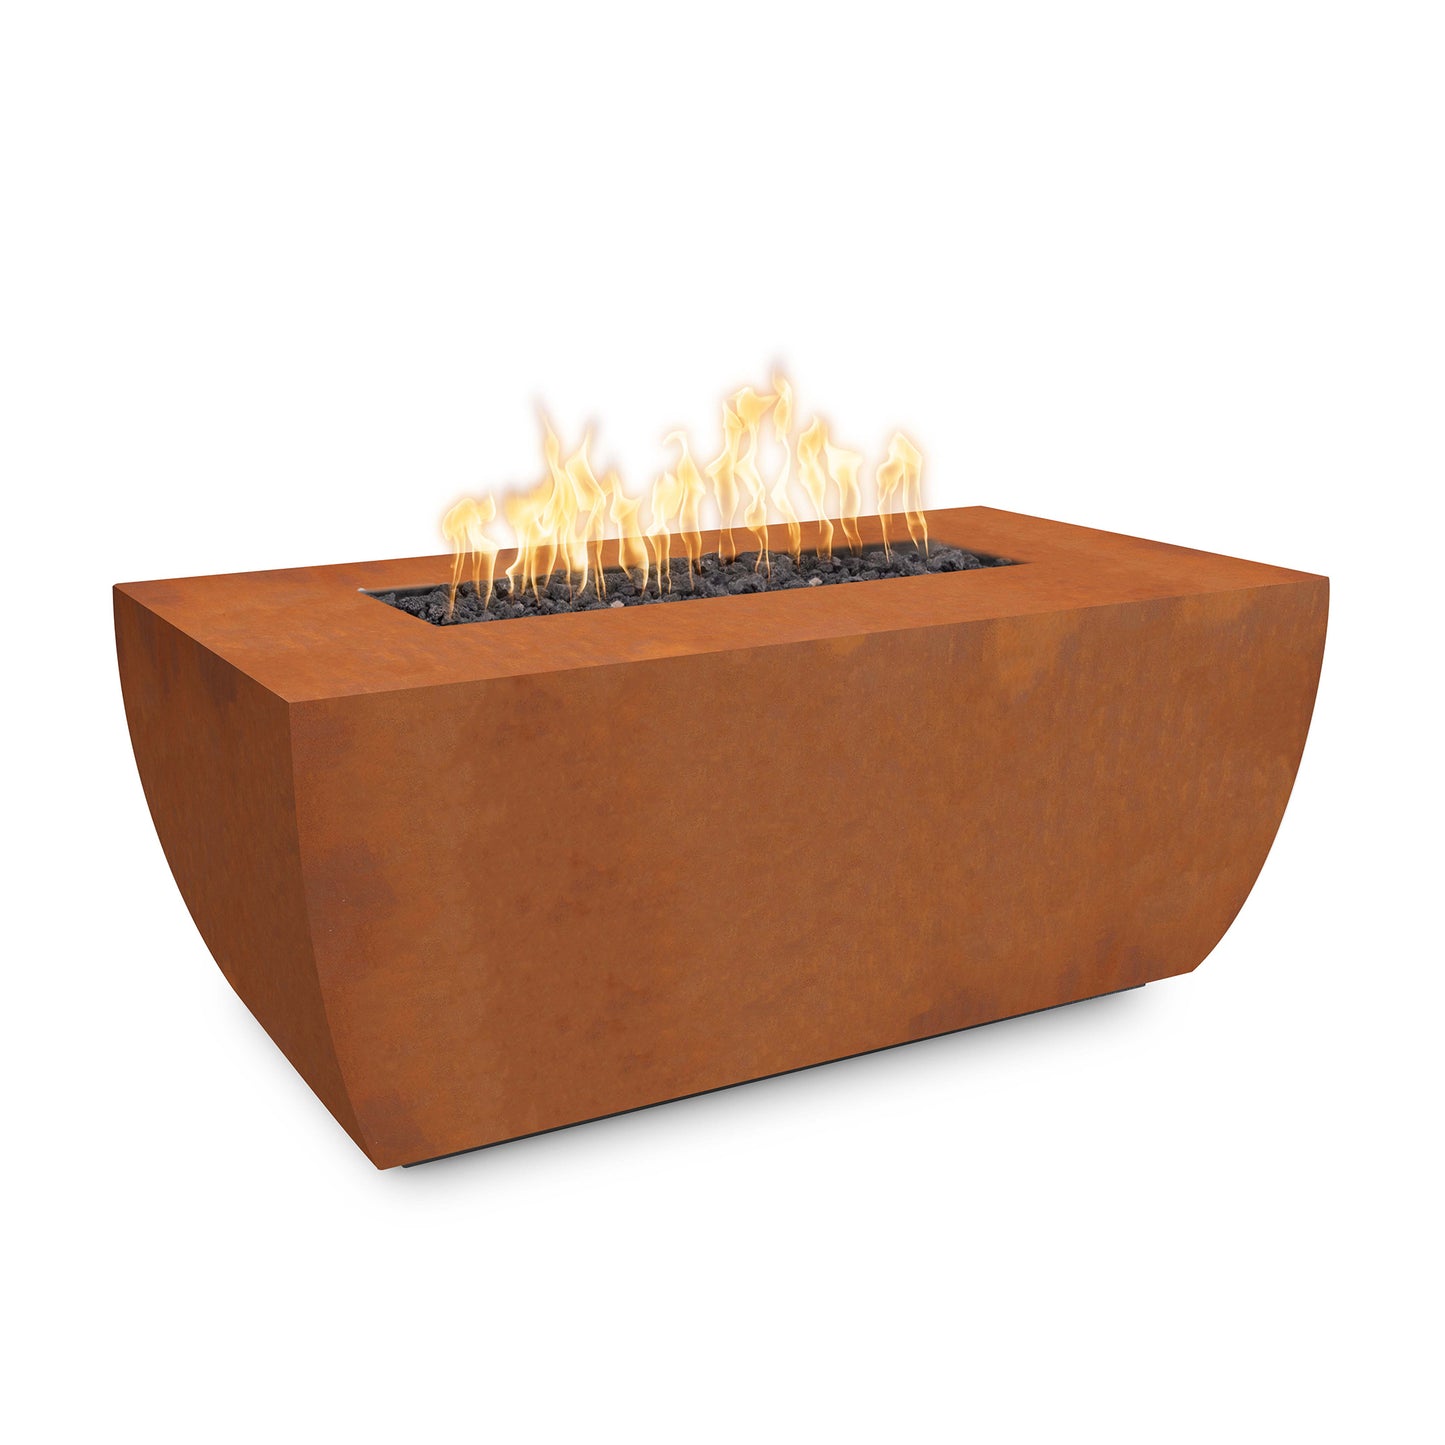 Avalon Metal Fire Pits 84" - 24" Tall - Electronic Ignition